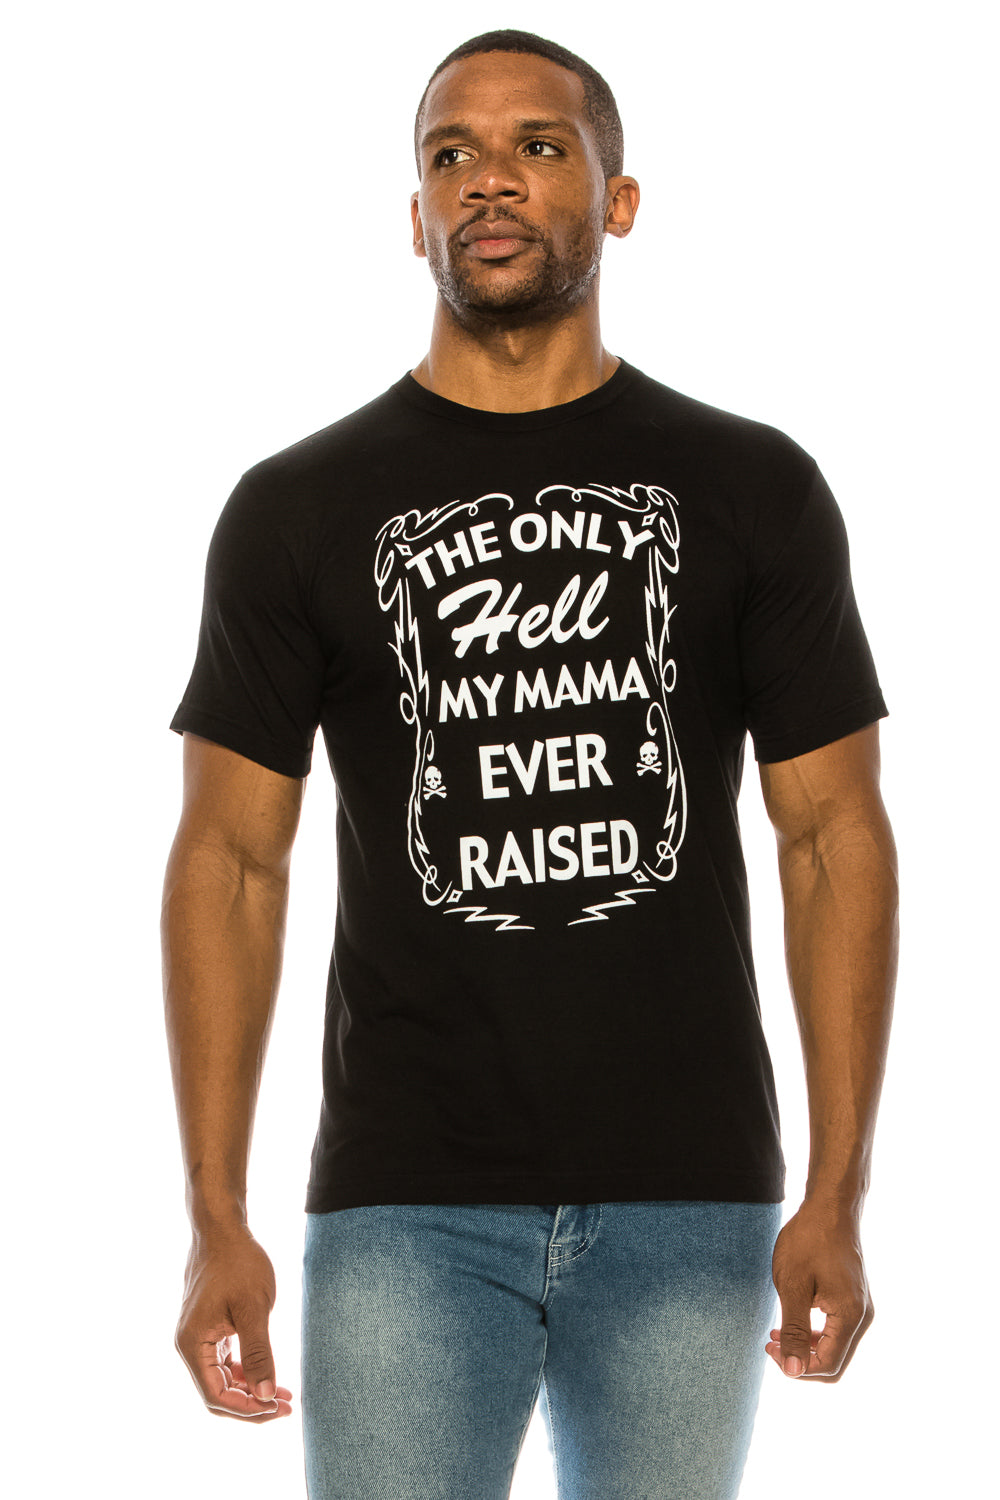 The Only Hell My Mama Ever Raised Shirt